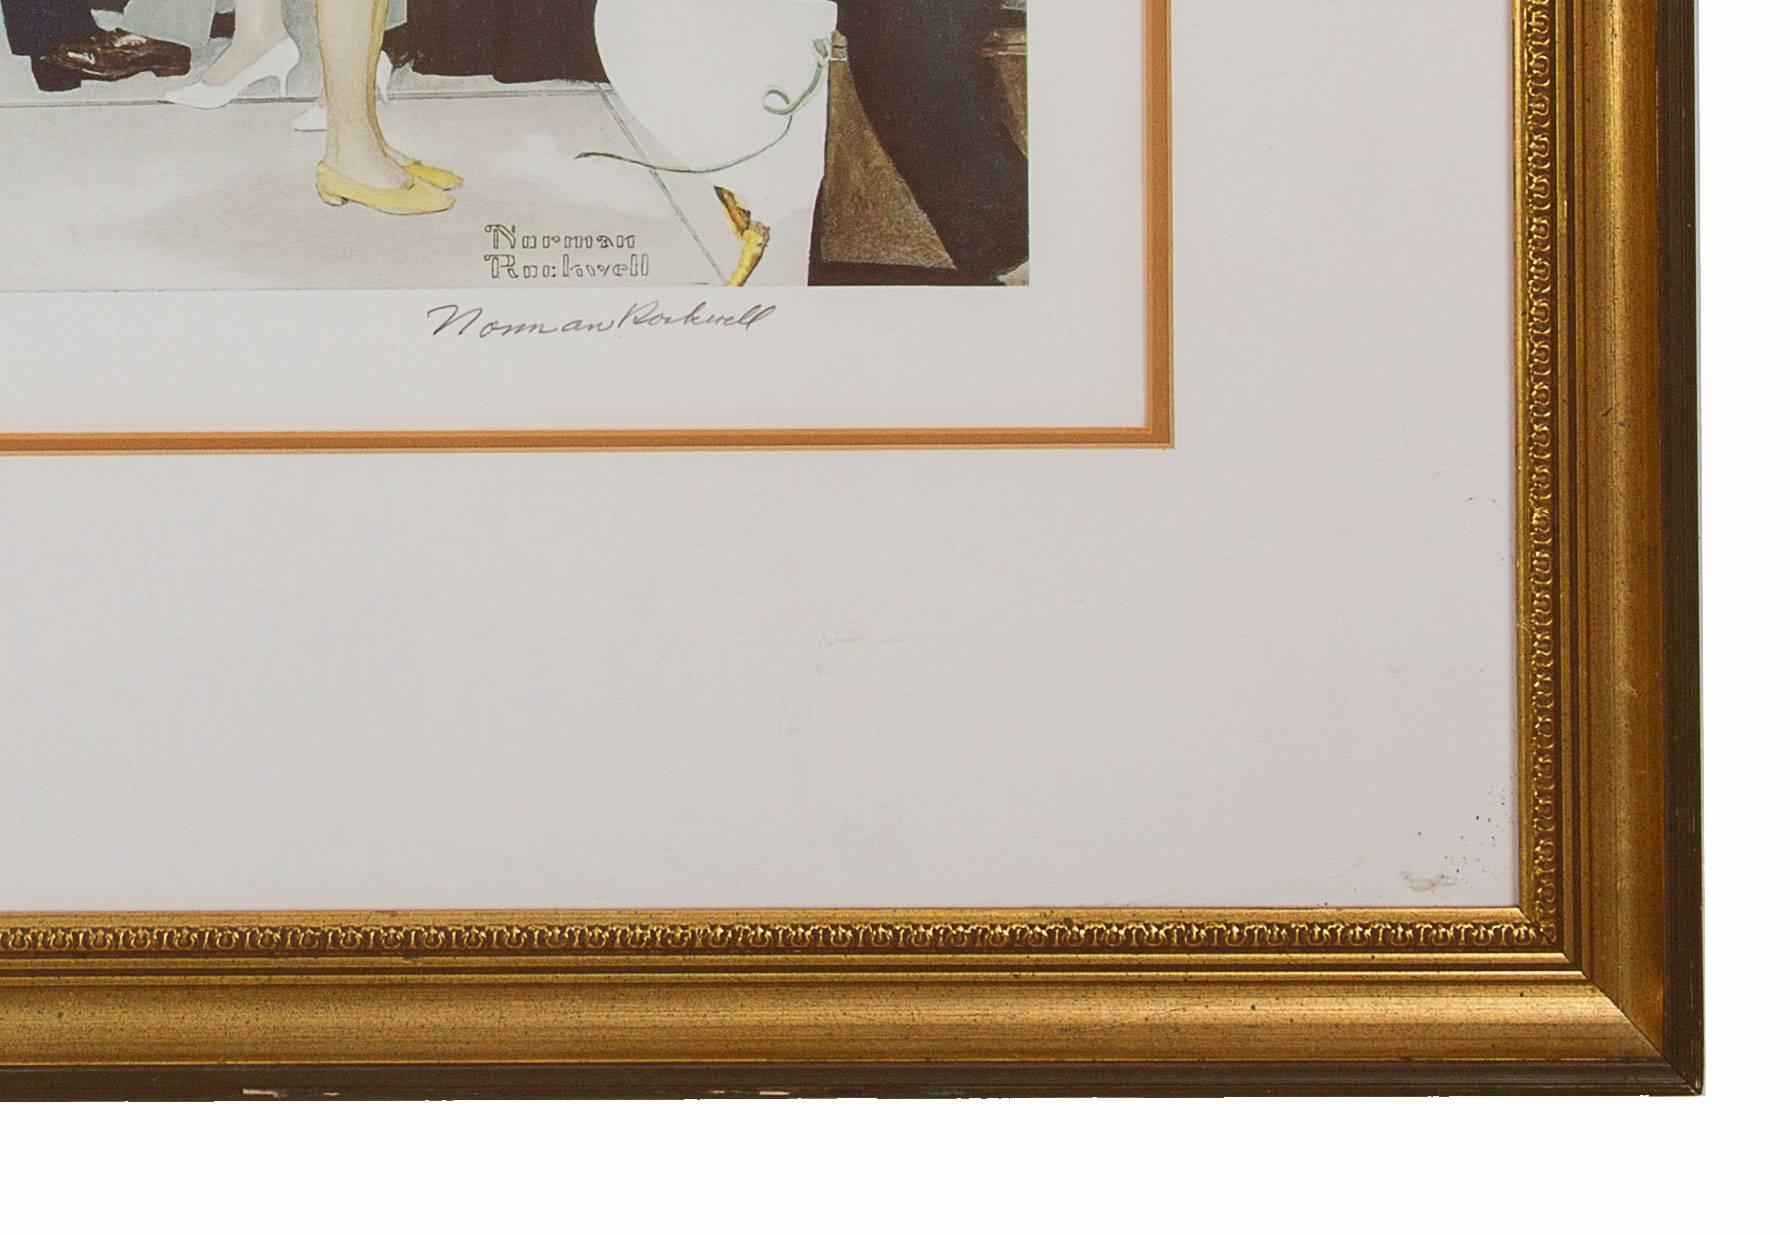 Limited edition and certified collotype of 'Saturday People' by Norman Rockwell. Signed in pencil by Rockwell and numbered 82 of 100.